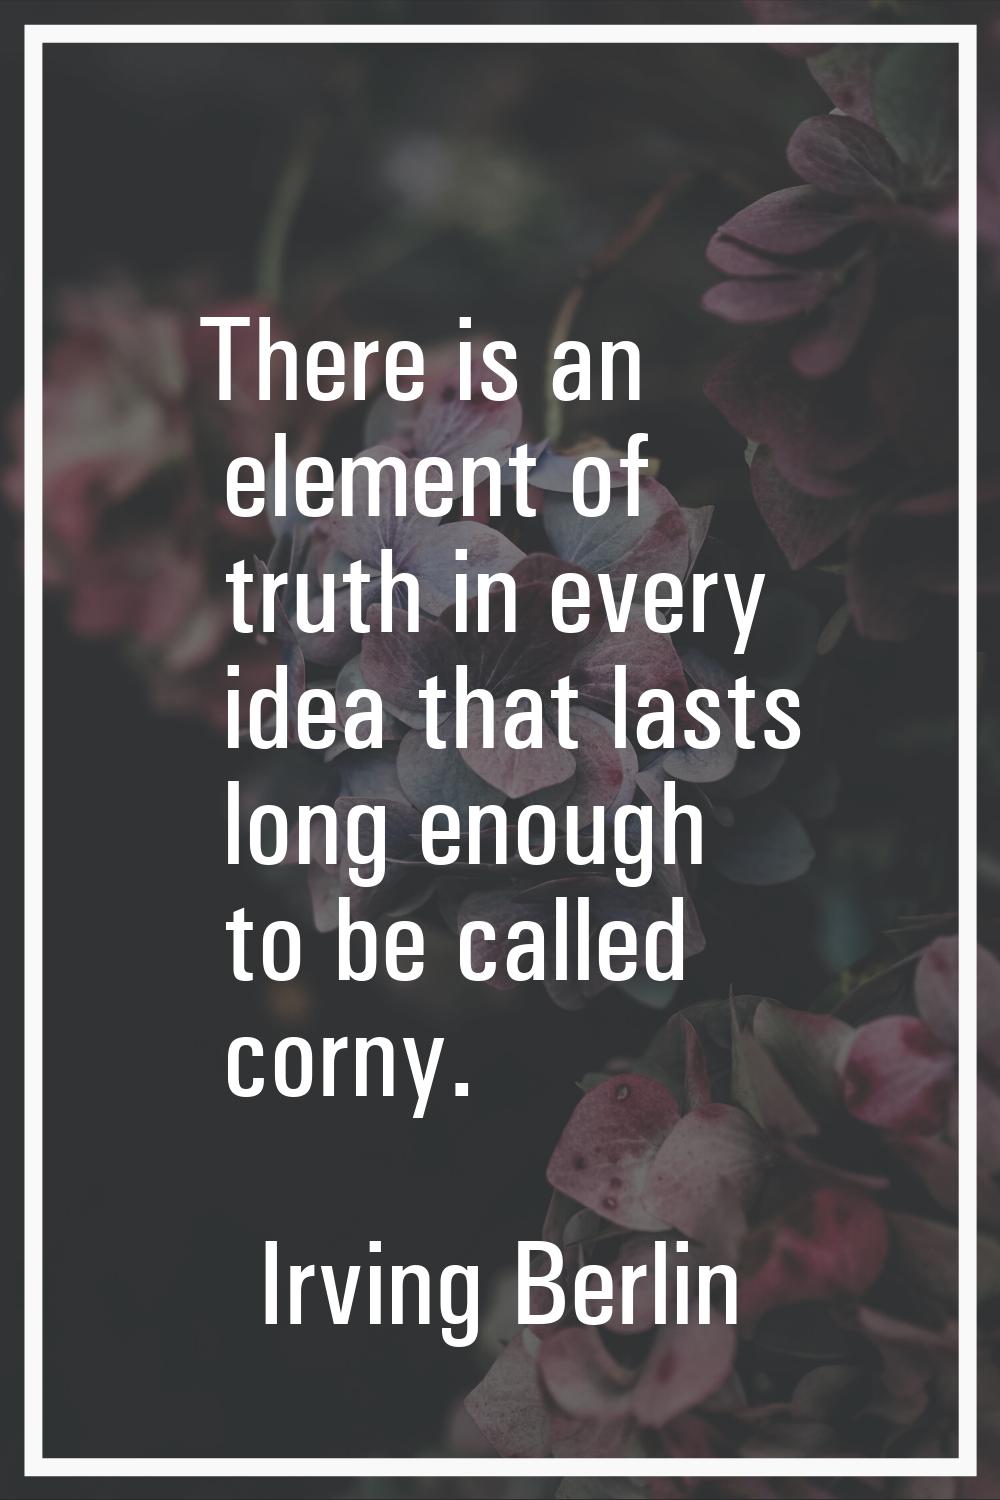 There is an element of truth in every idea that lasts long enough to be called corny.